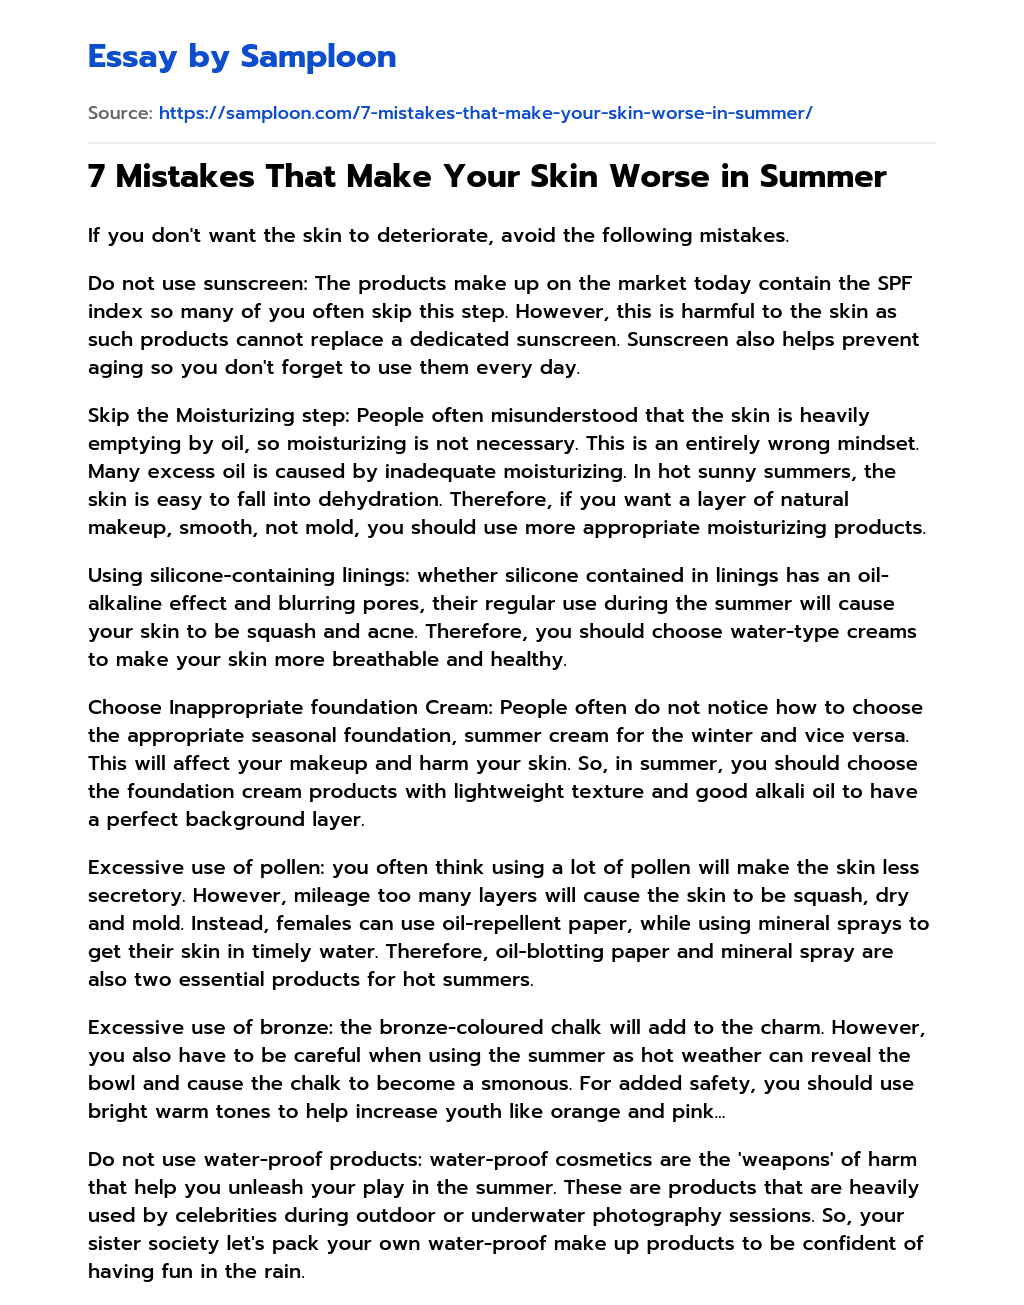 7 Mistakes That Make Your Skin Worse in Summer essay